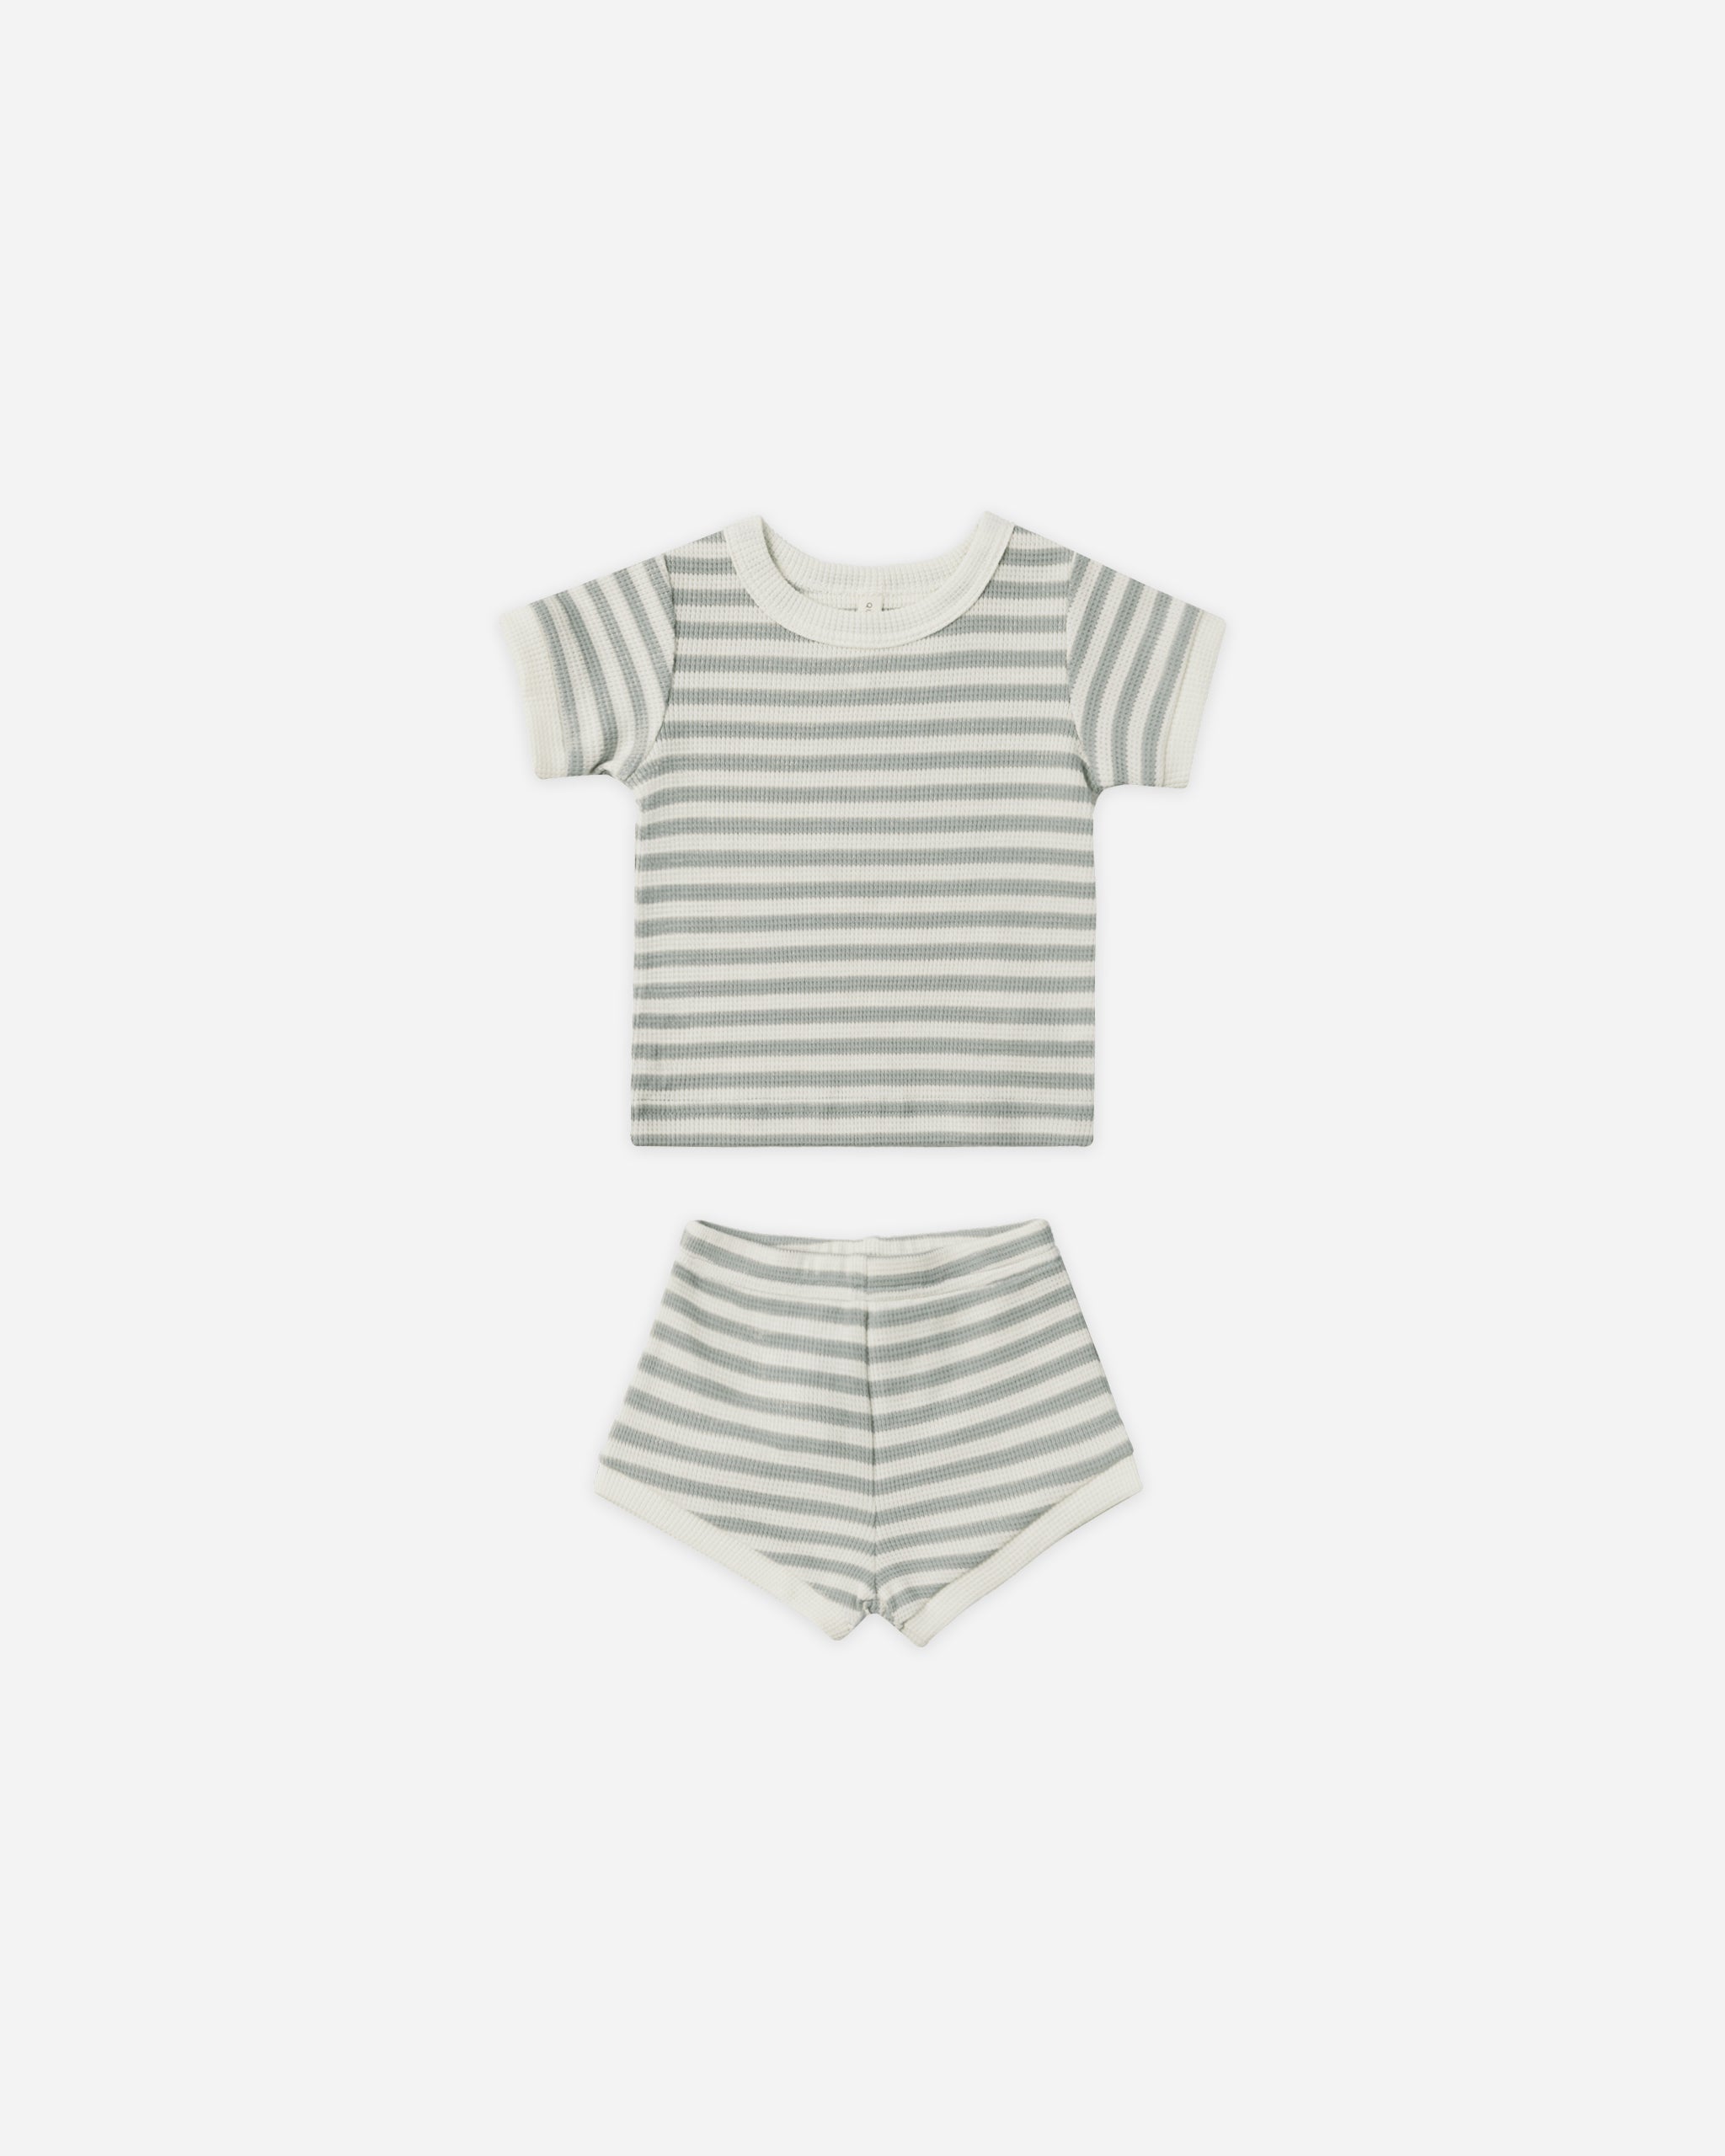 Waffle Shortie Set || Sky Stripe - Rylee + Cru | Kids Clothes | Trendy Baby Clothes | Modern Infant Outfits |